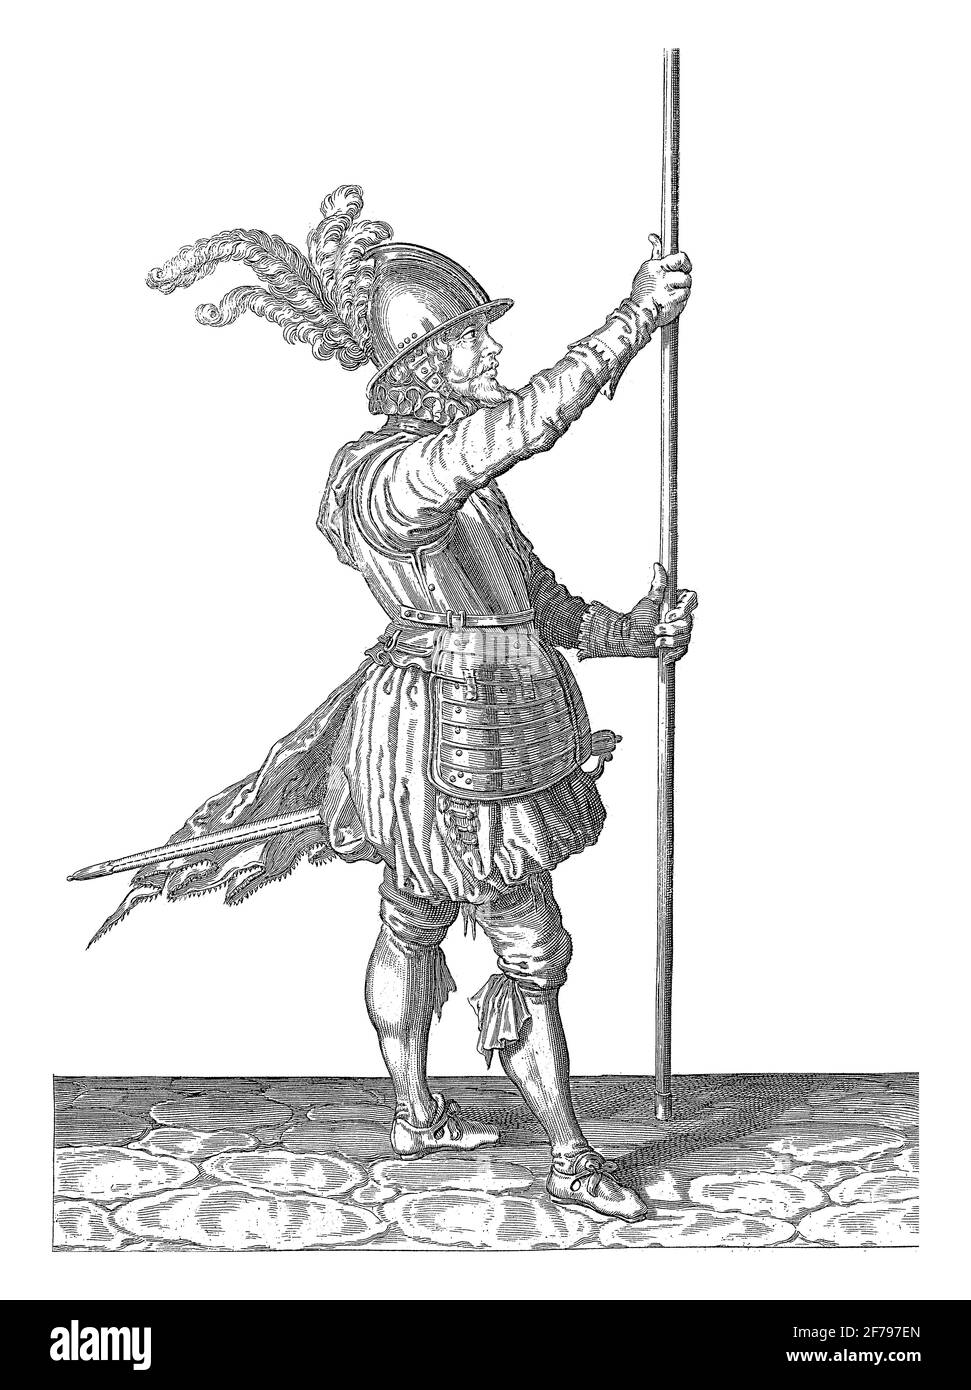 A soldier, full-length, to the right, holding a skewer (lance) with both hands upright slightly above the ground in front of him, vintage engraving. Stock Photo